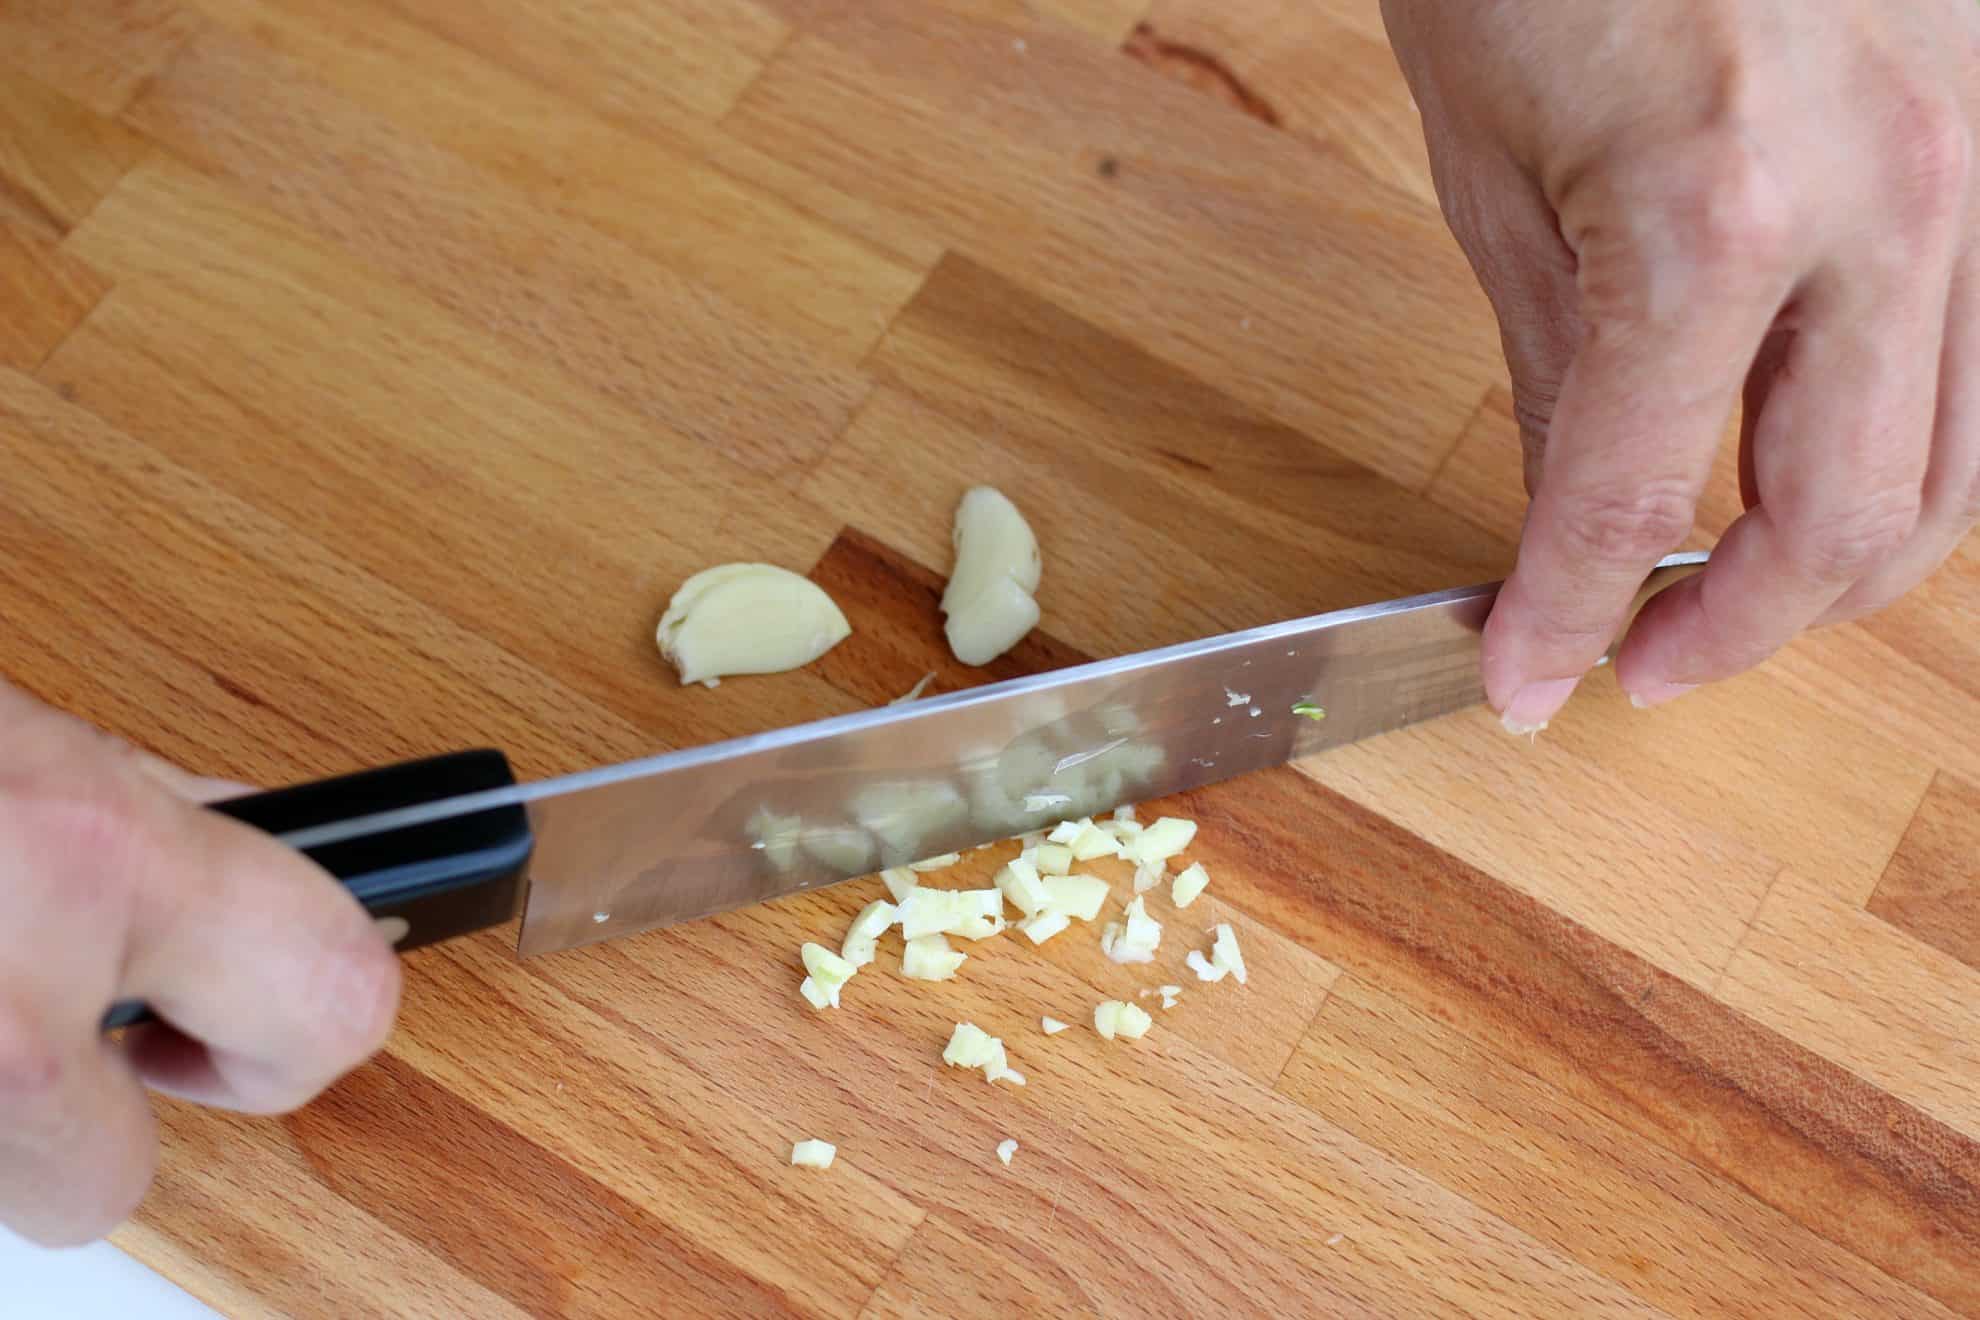 Mincing garlic cloves after they have been smashed with the blade of a knife.